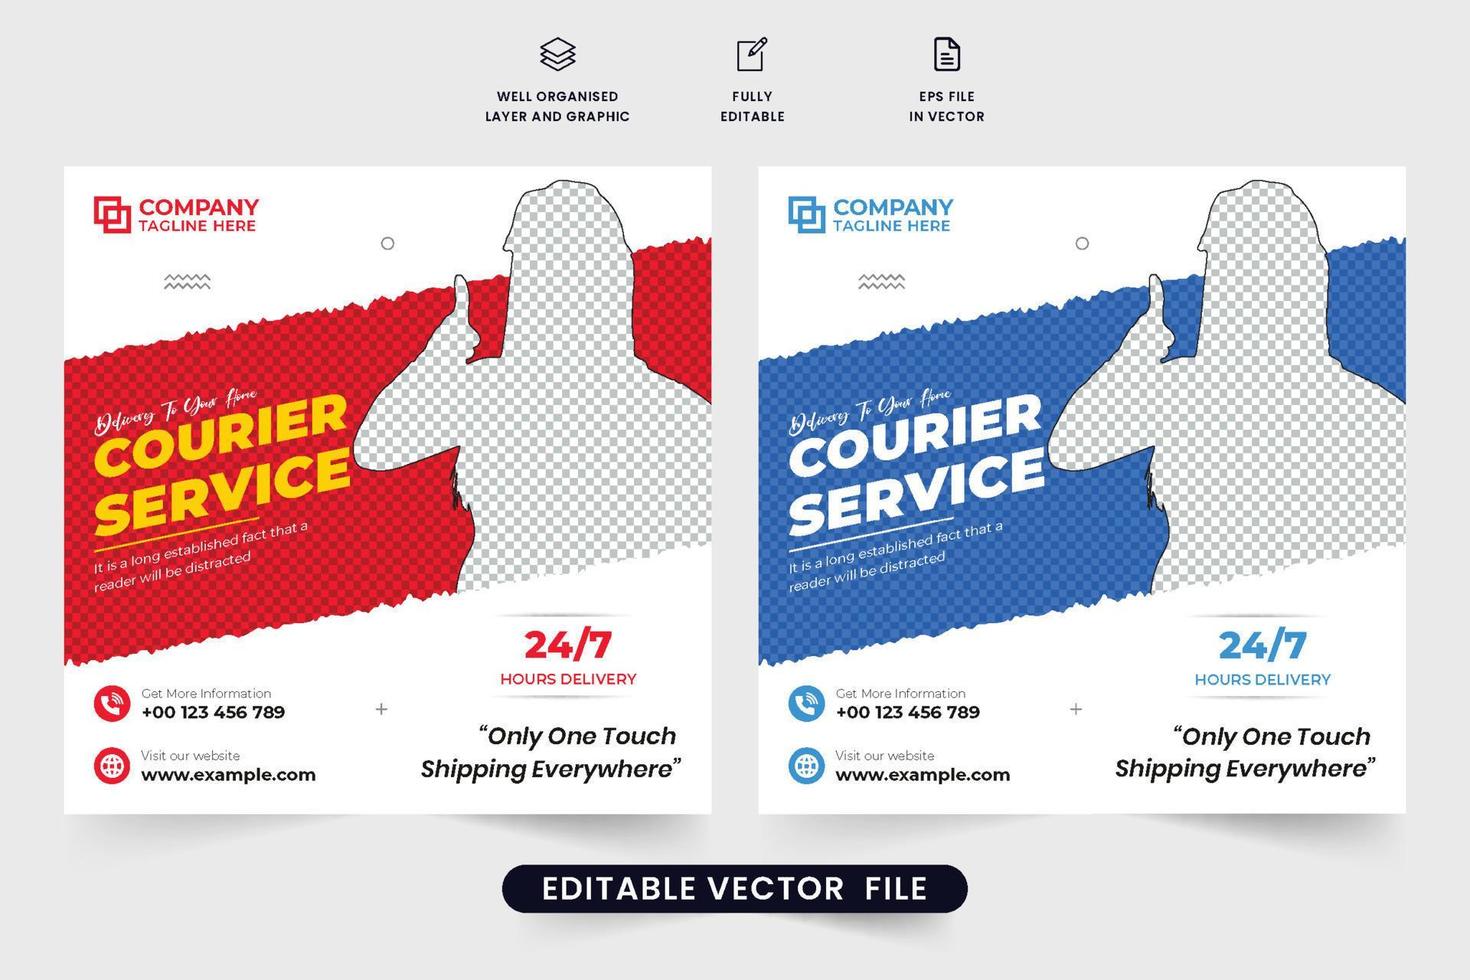 Supermarket home delivery service template vector with photo placeholders. Courier business promotional web banner design with red and blue colors. Delivery service social media post vector.